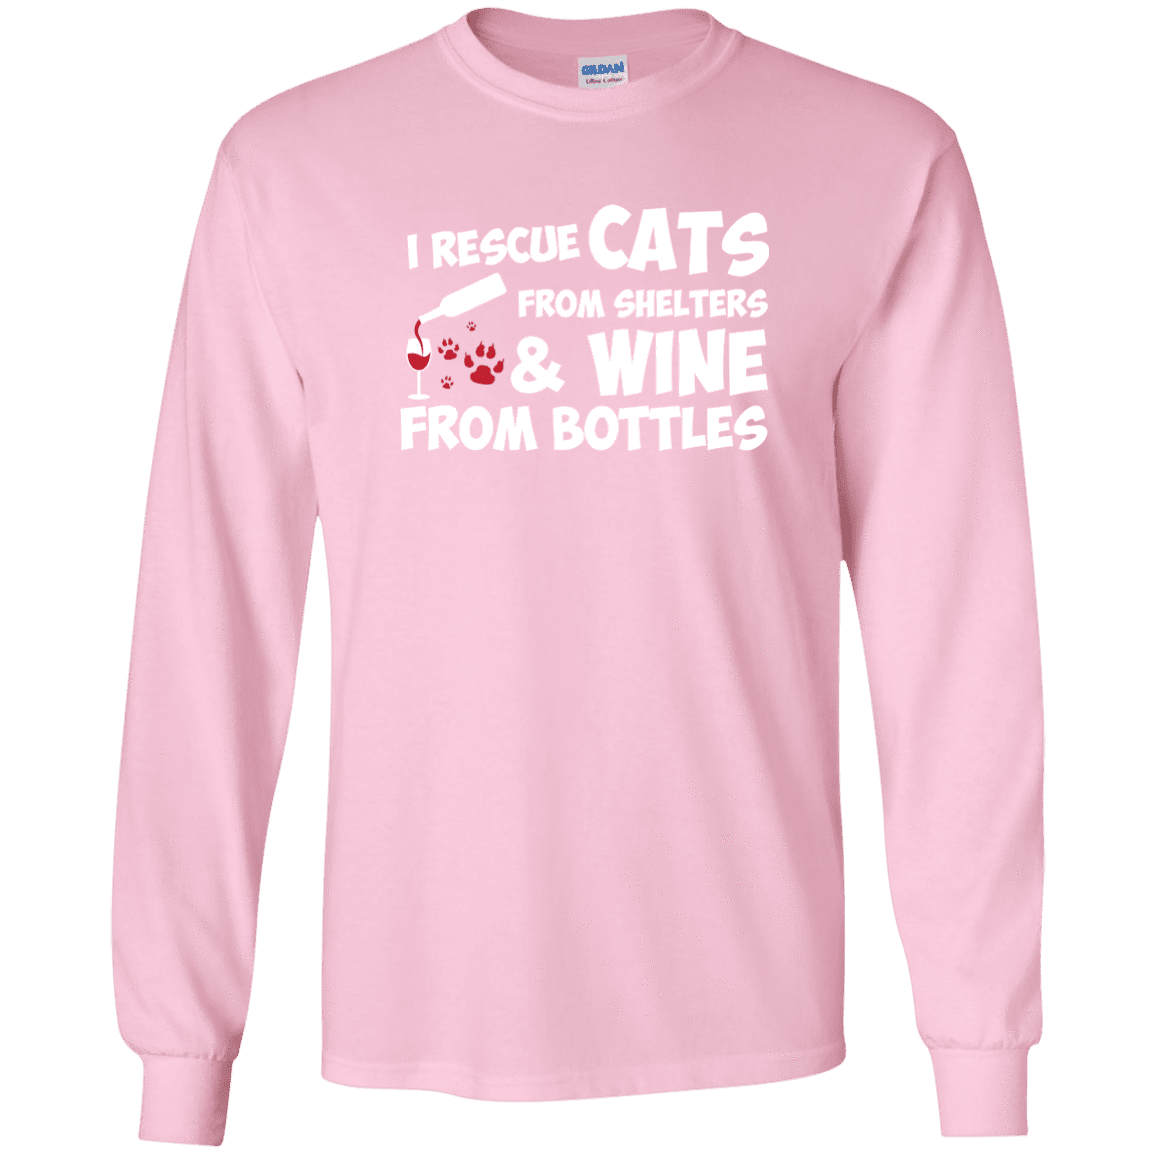 I Rescue Cats And Wine - Long Sleeve T Shirt.